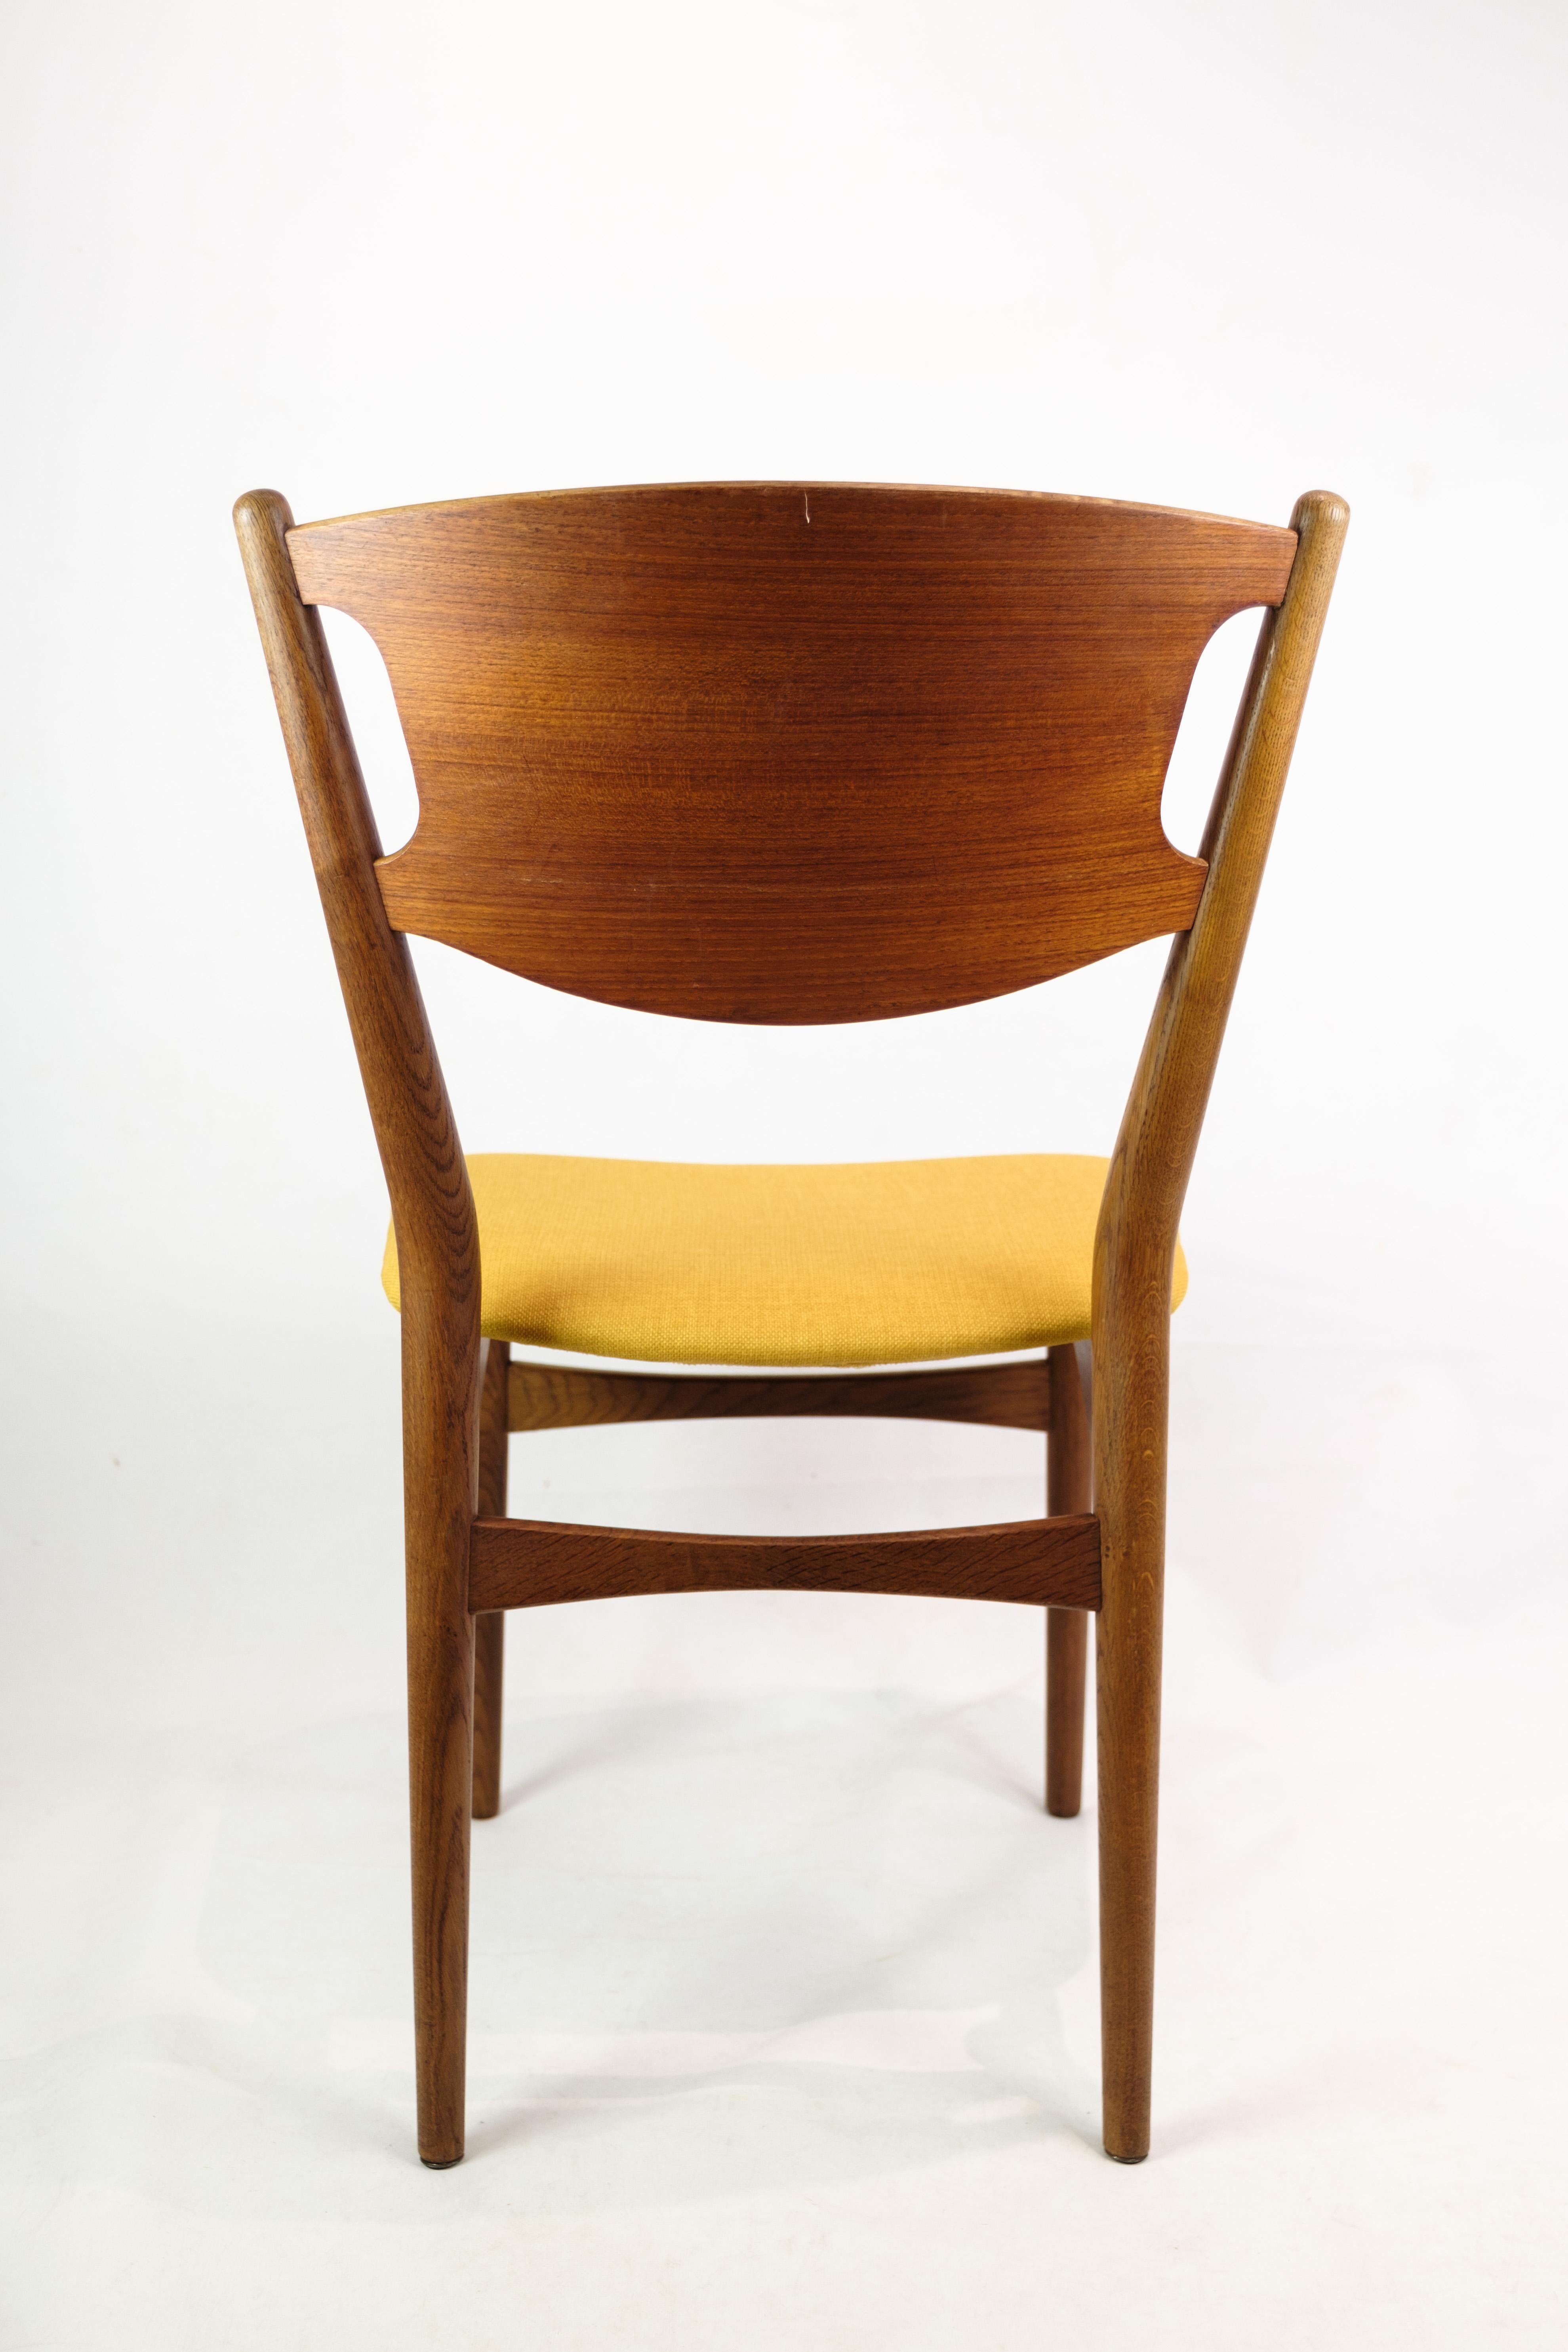 4 Dining Room Chairs, Danish Design, Teak Wood, Fabric Cover, 1960 In Good Condition For Sale In Lejre, DK